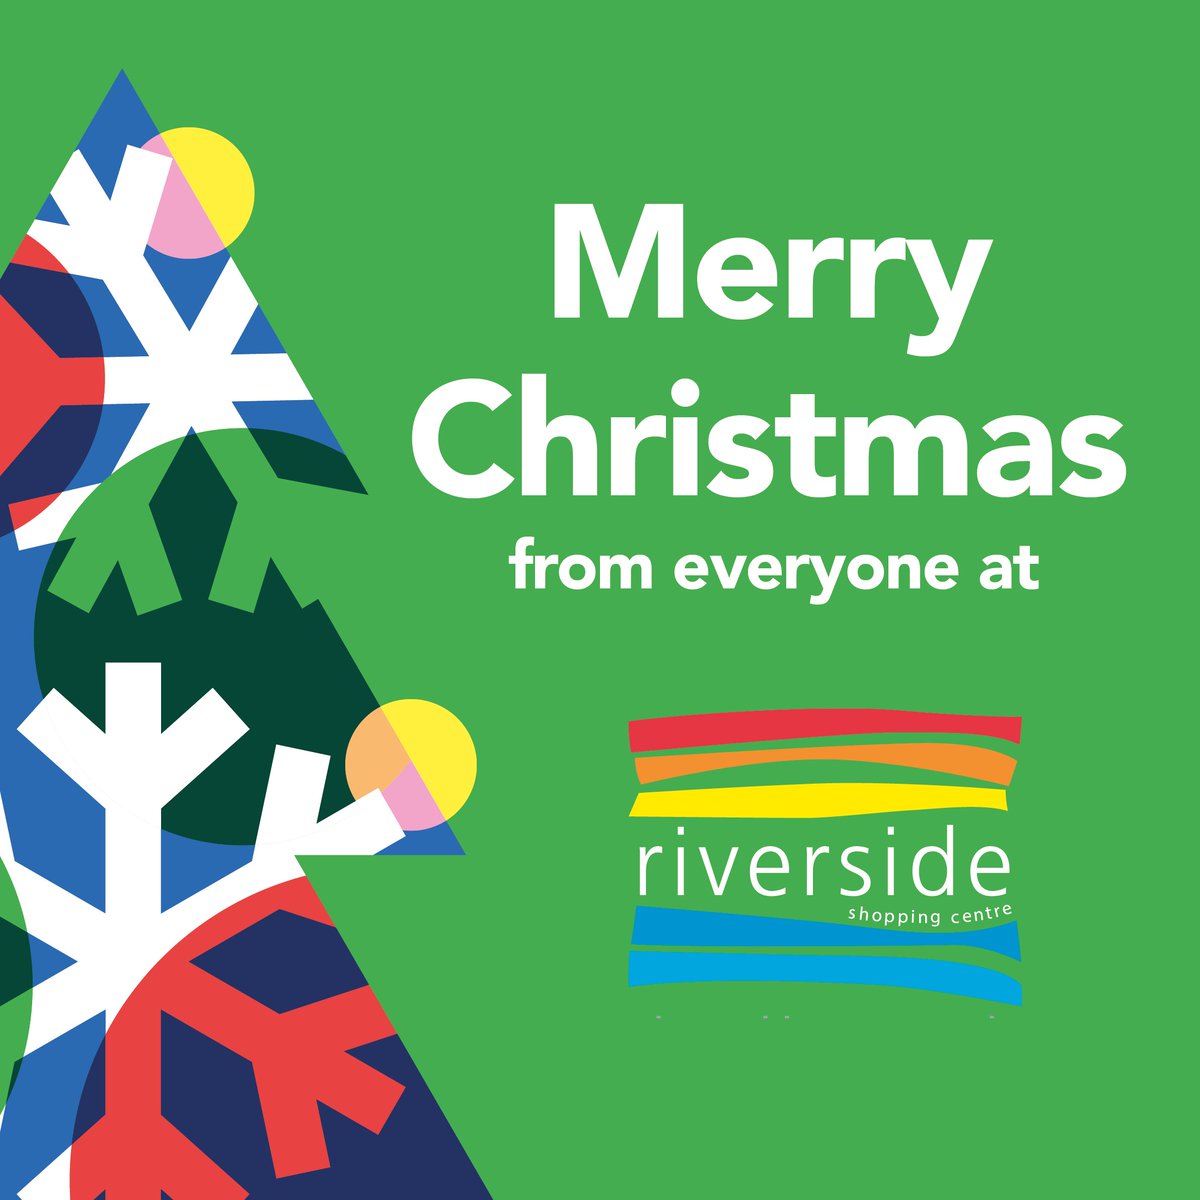 The team here at Riverside are wishing you all a very Merry Christmas! 🎄🎅🎁